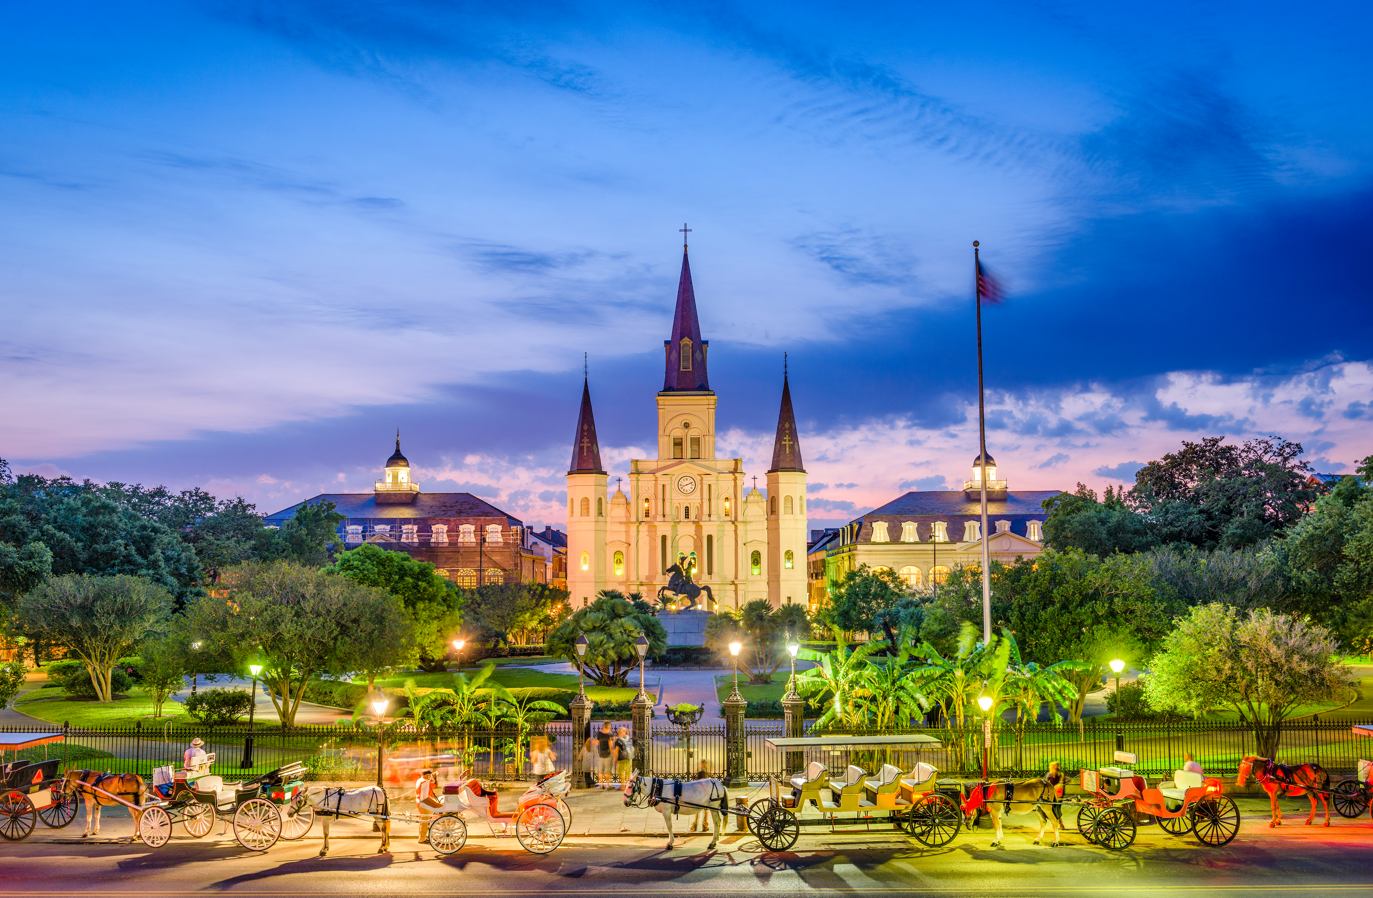 St. Louis Cathedral, New Orleans